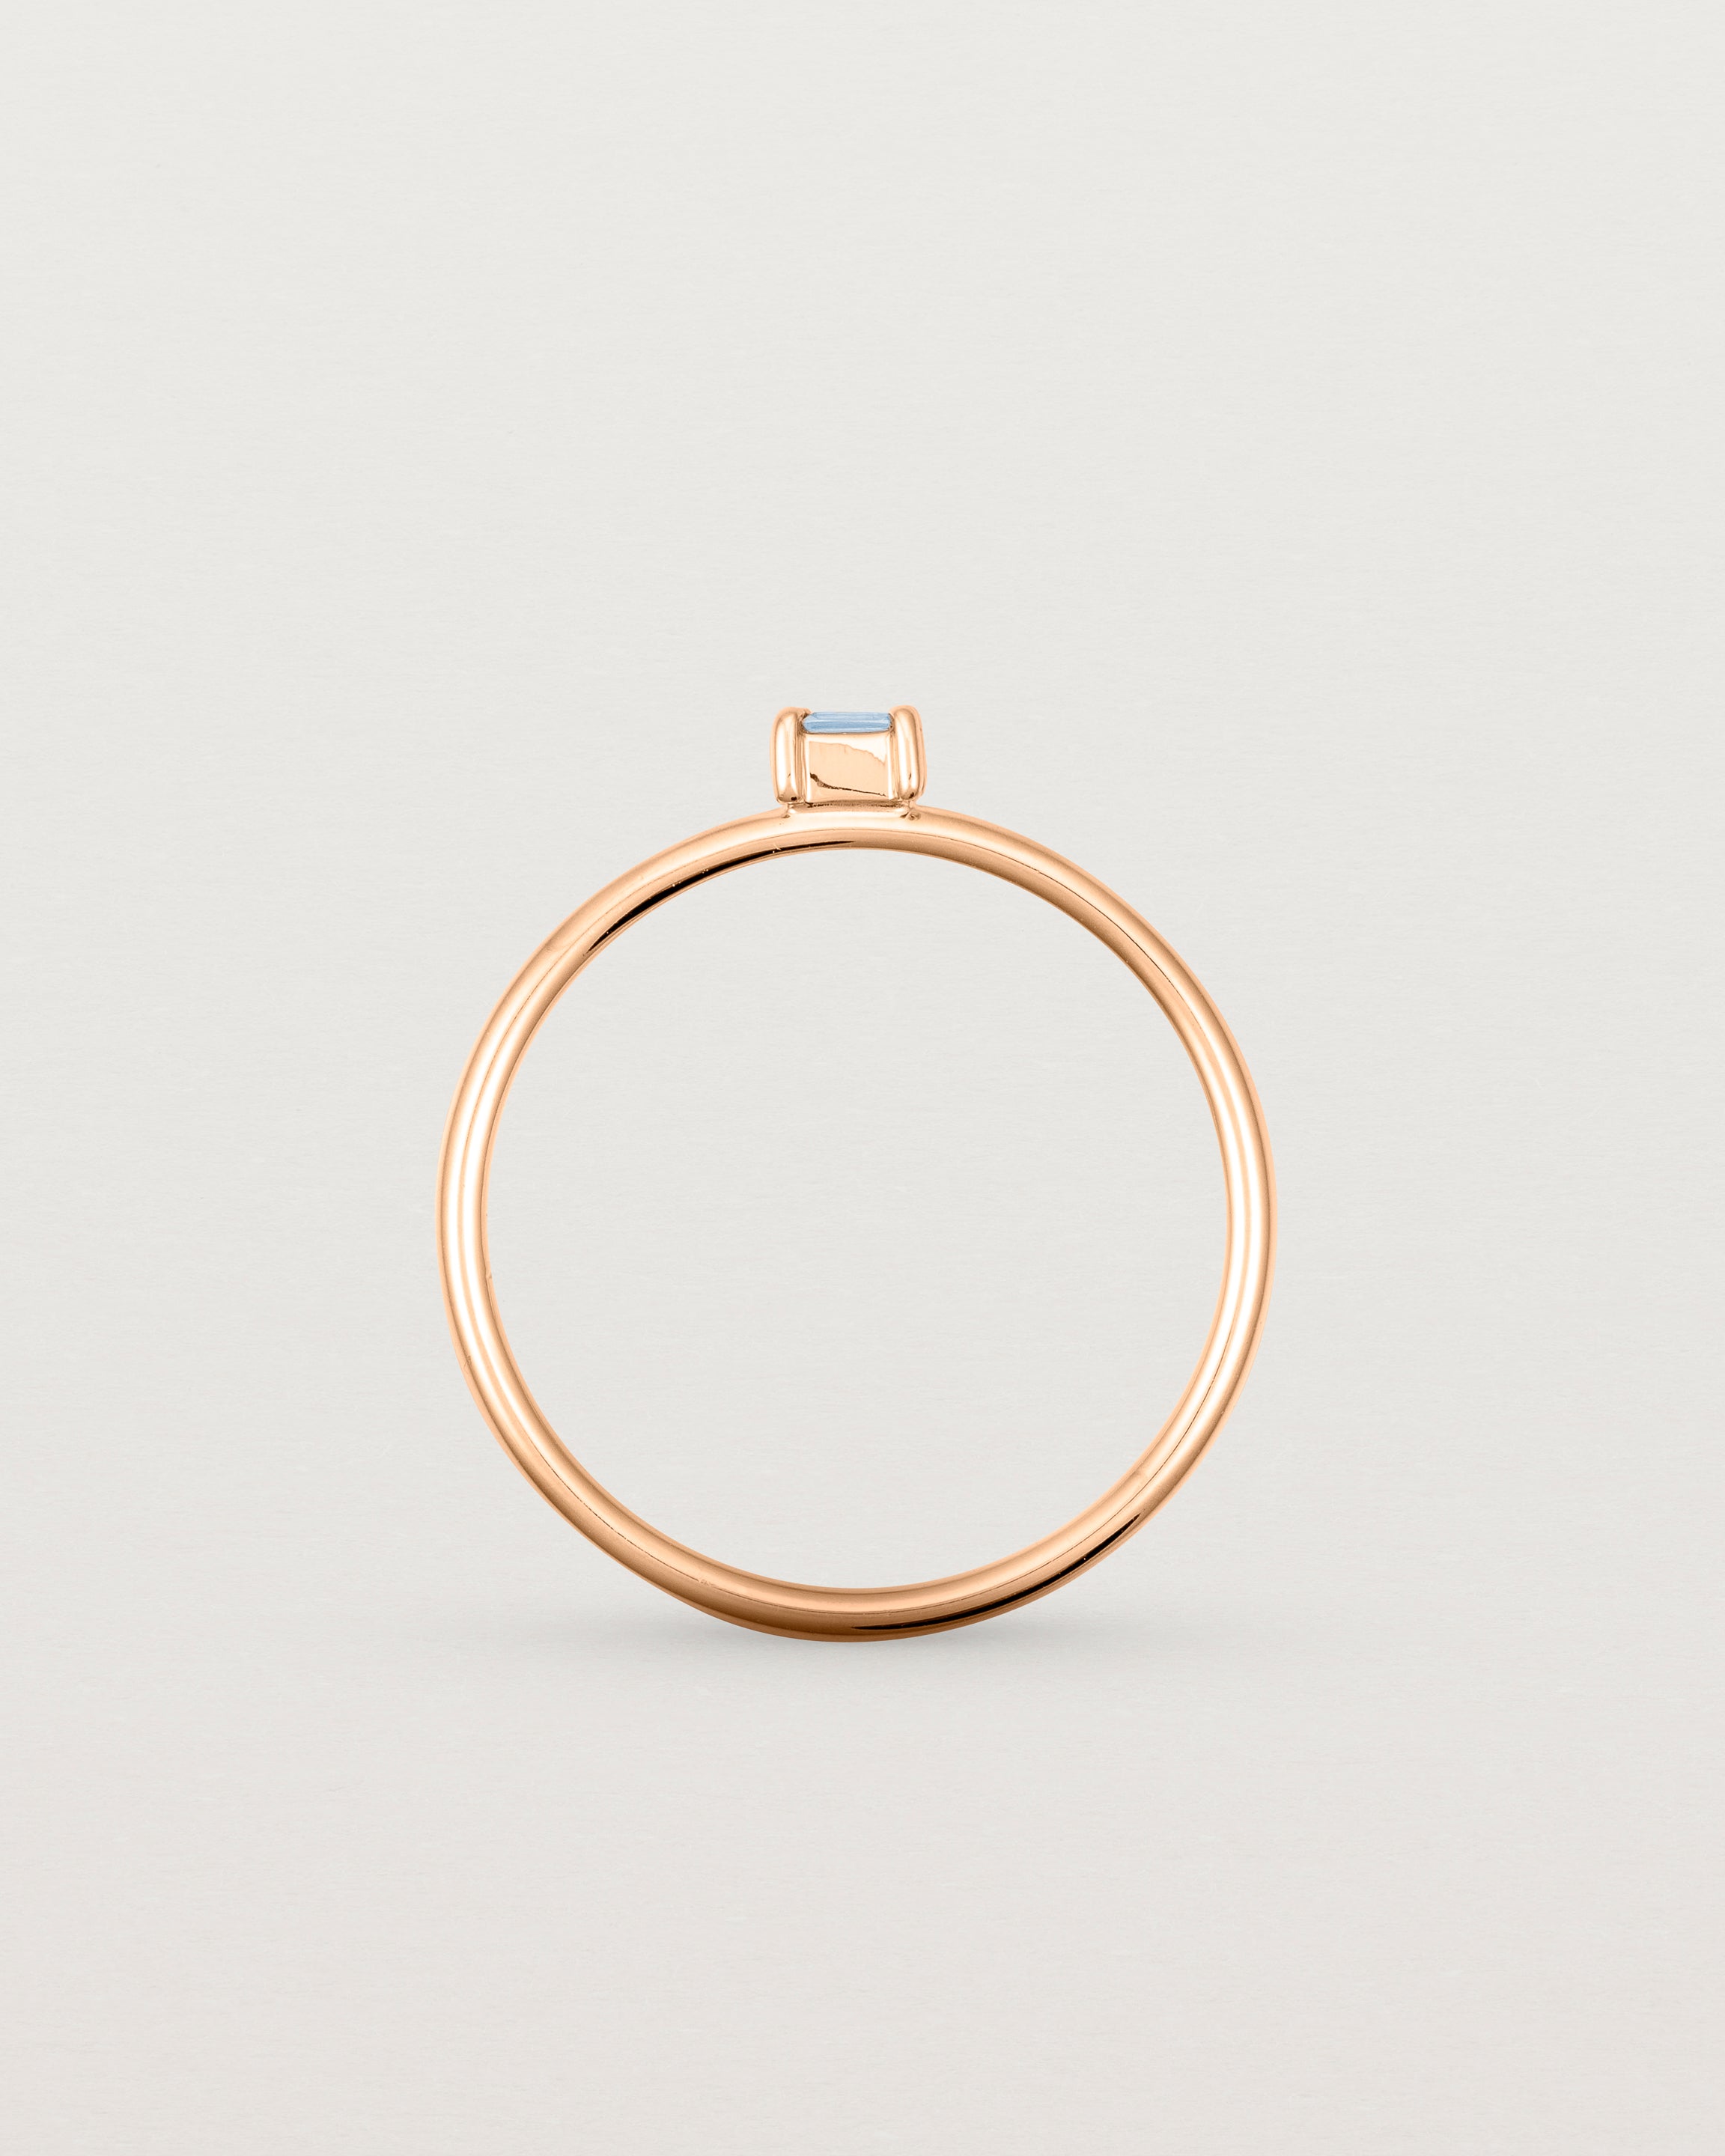 Fine rose gold ring with a champagne coloured helidor stone